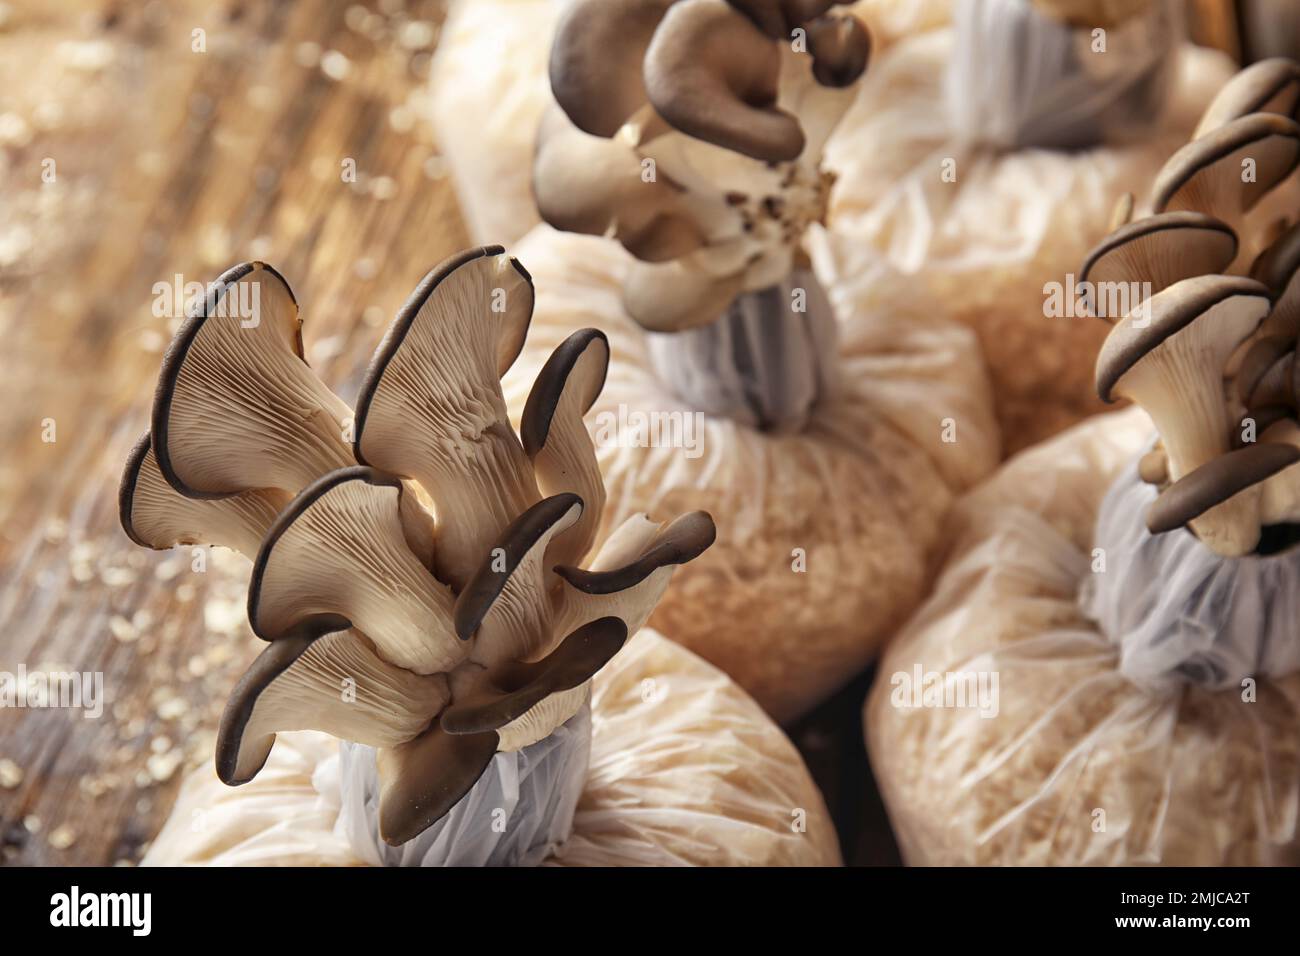 Oyster mushrooms growing in sawdust on wooden table. Cultivation of fungi Stock Photo